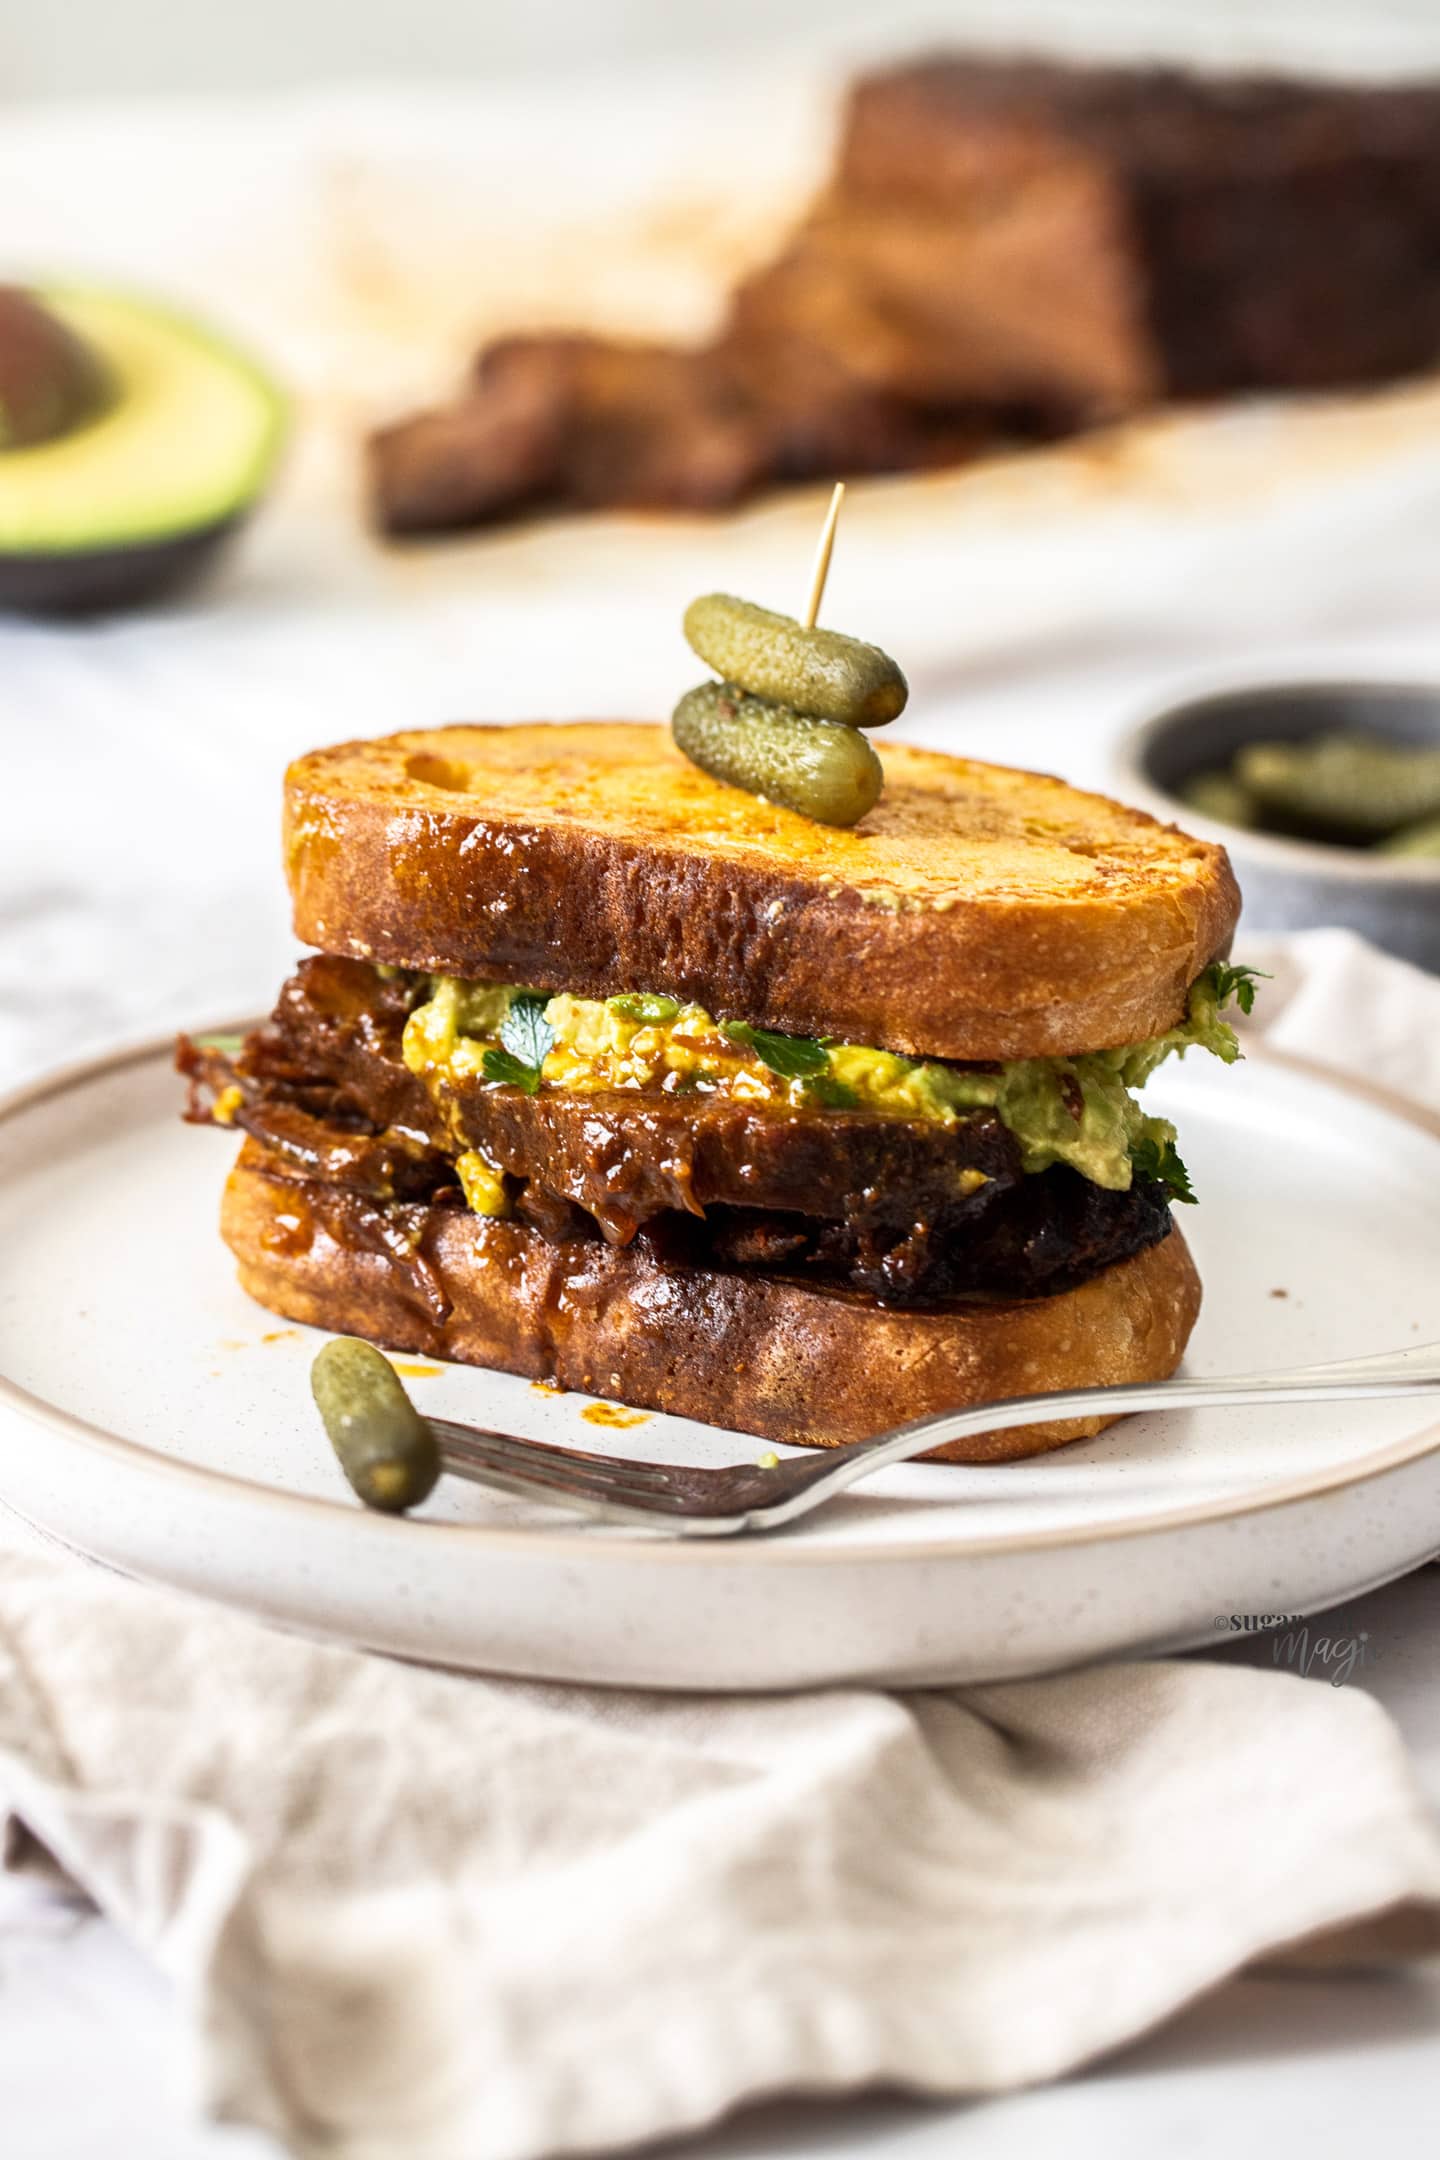 A sandwich filled with BBQ beef brisket slices and avocado.